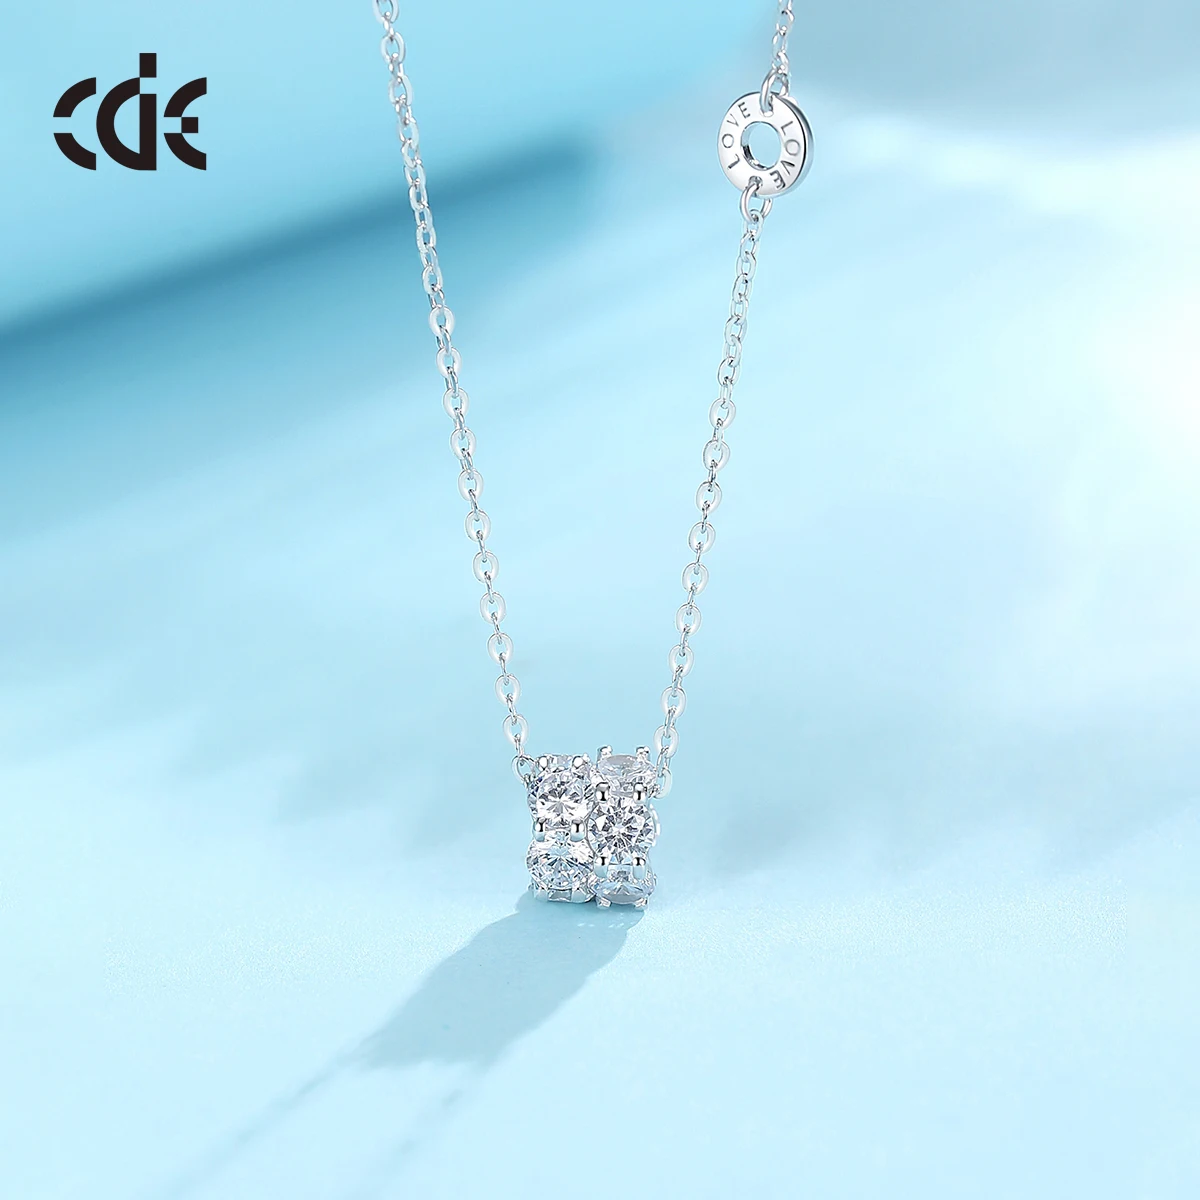 CDE WYN3 Fine Jewelry 925 Sterling Silver Necklace Zircon double circle pendant Rhodium Plated Women Pendant Necklace